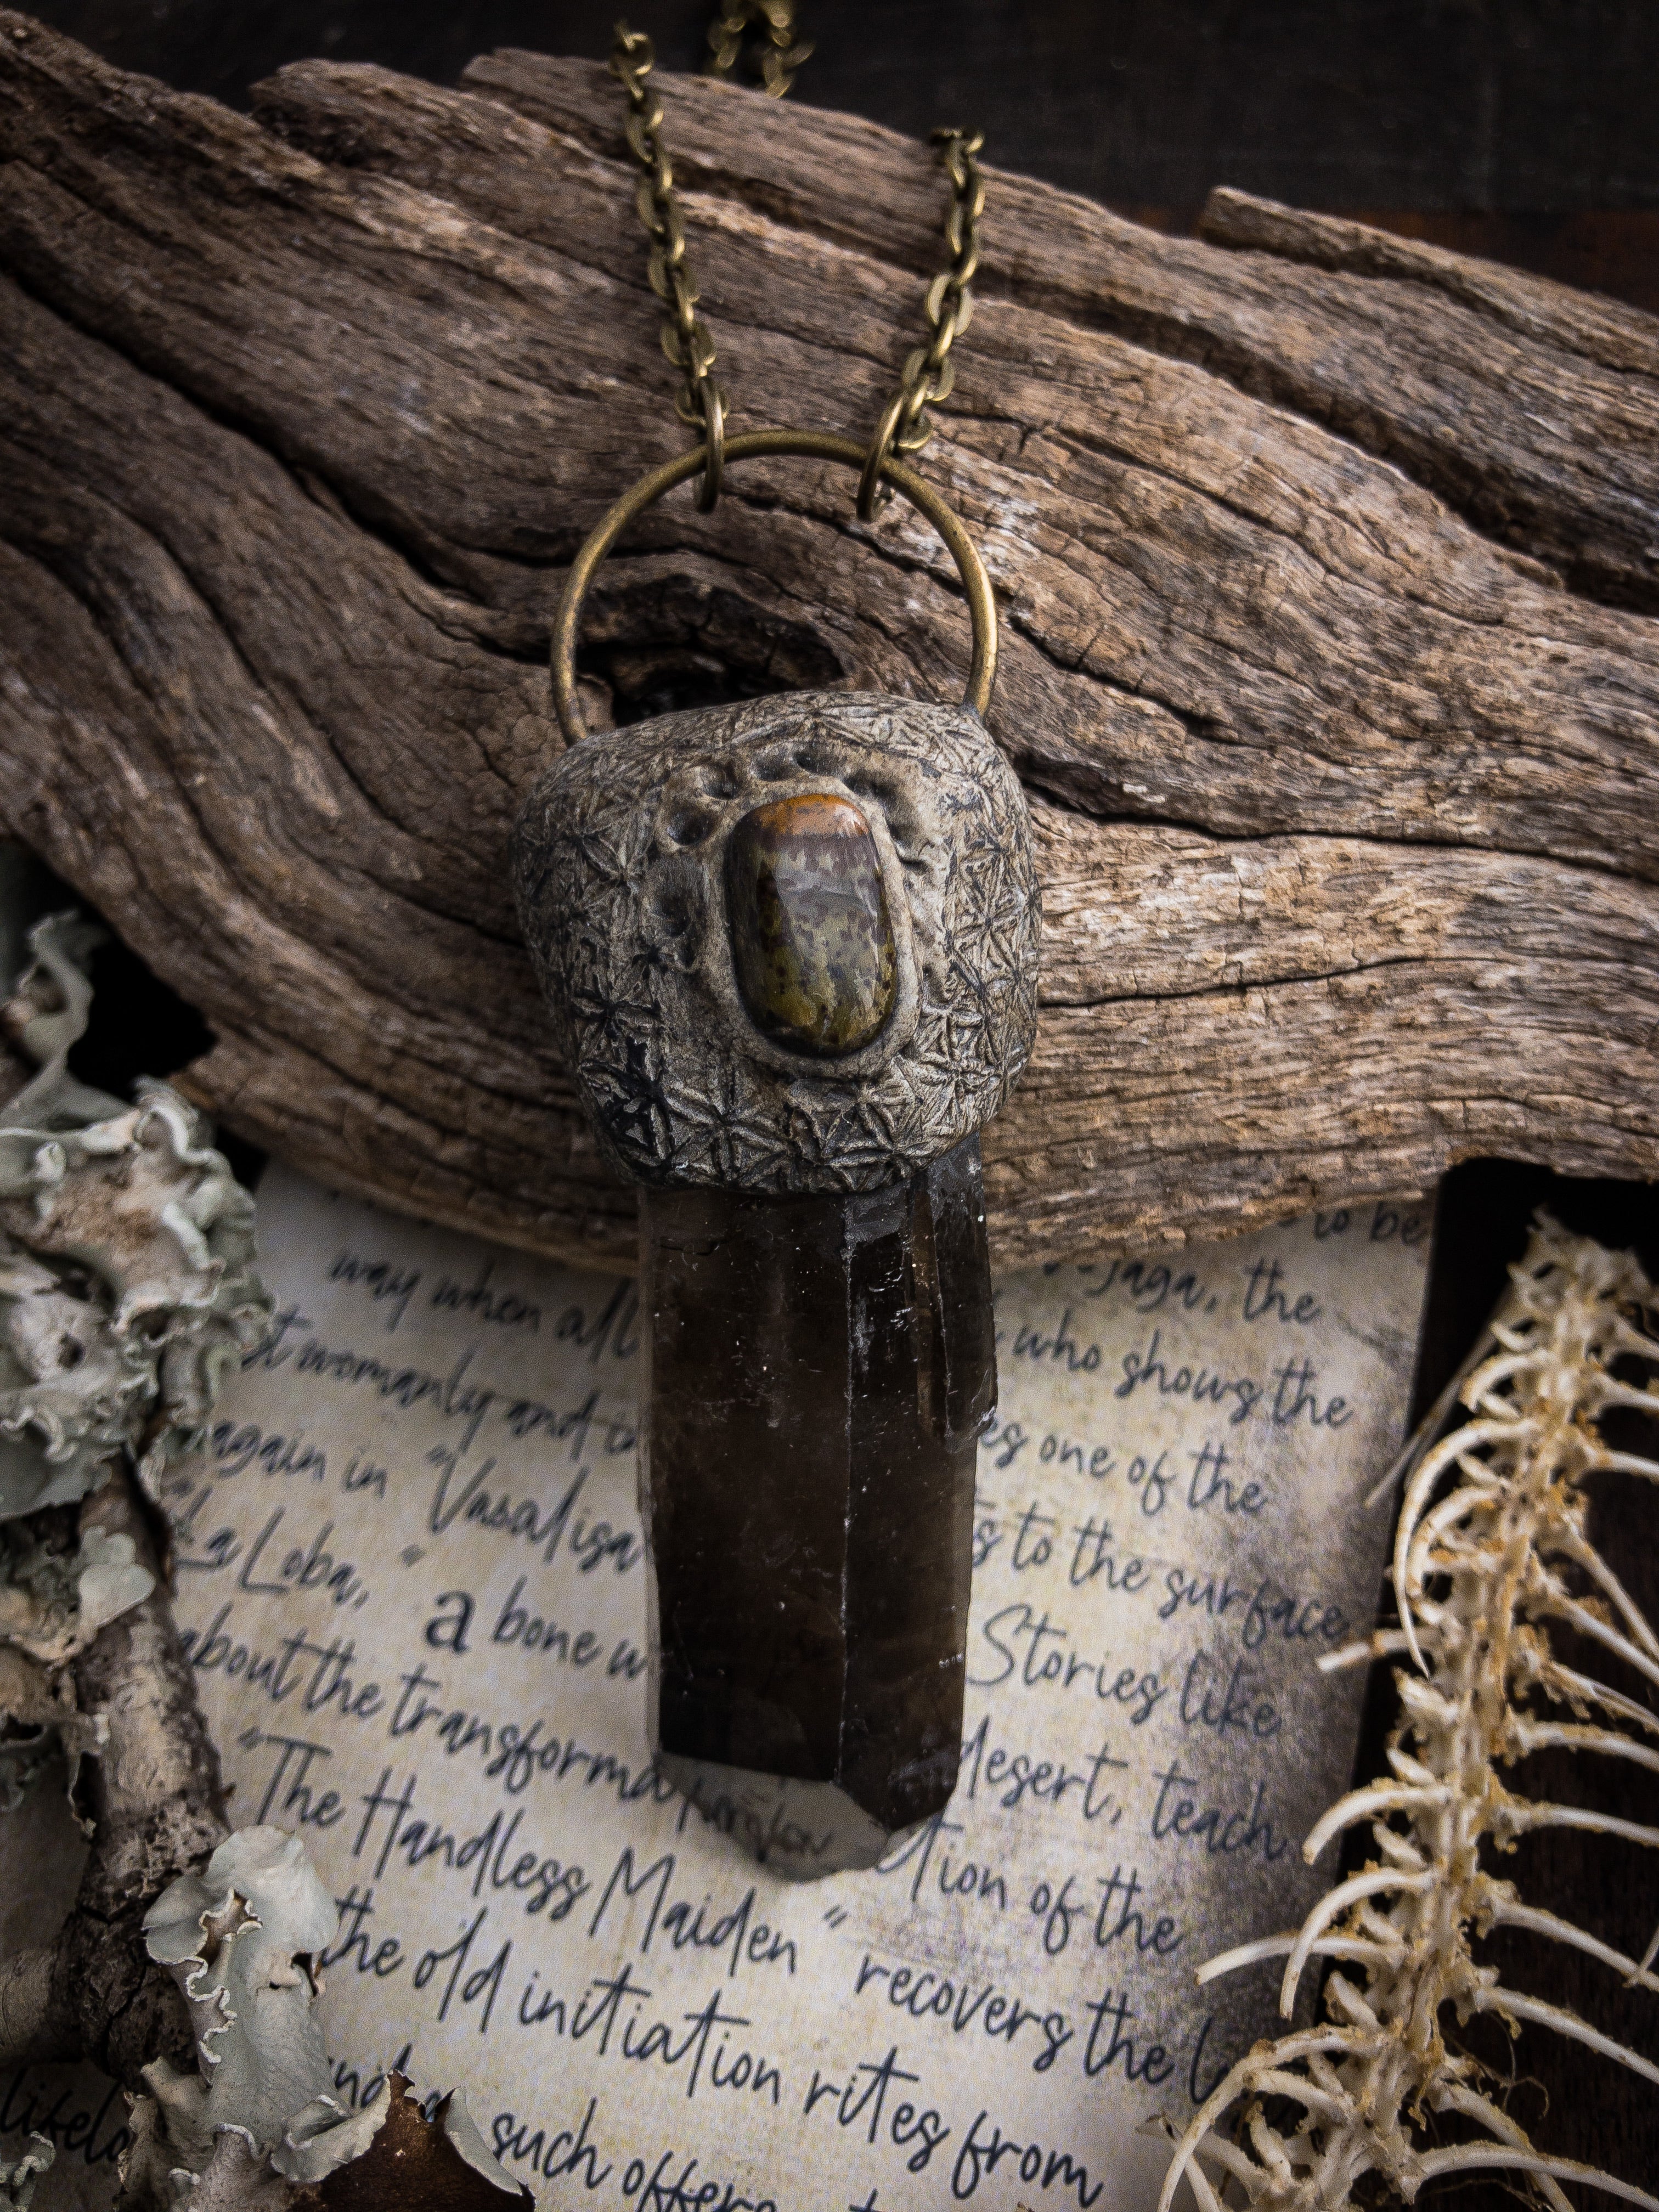 Creative Consciousness Necklace with Smoky Quartz and Tigers Eye for Spiritual Connection, Creativity and Growth